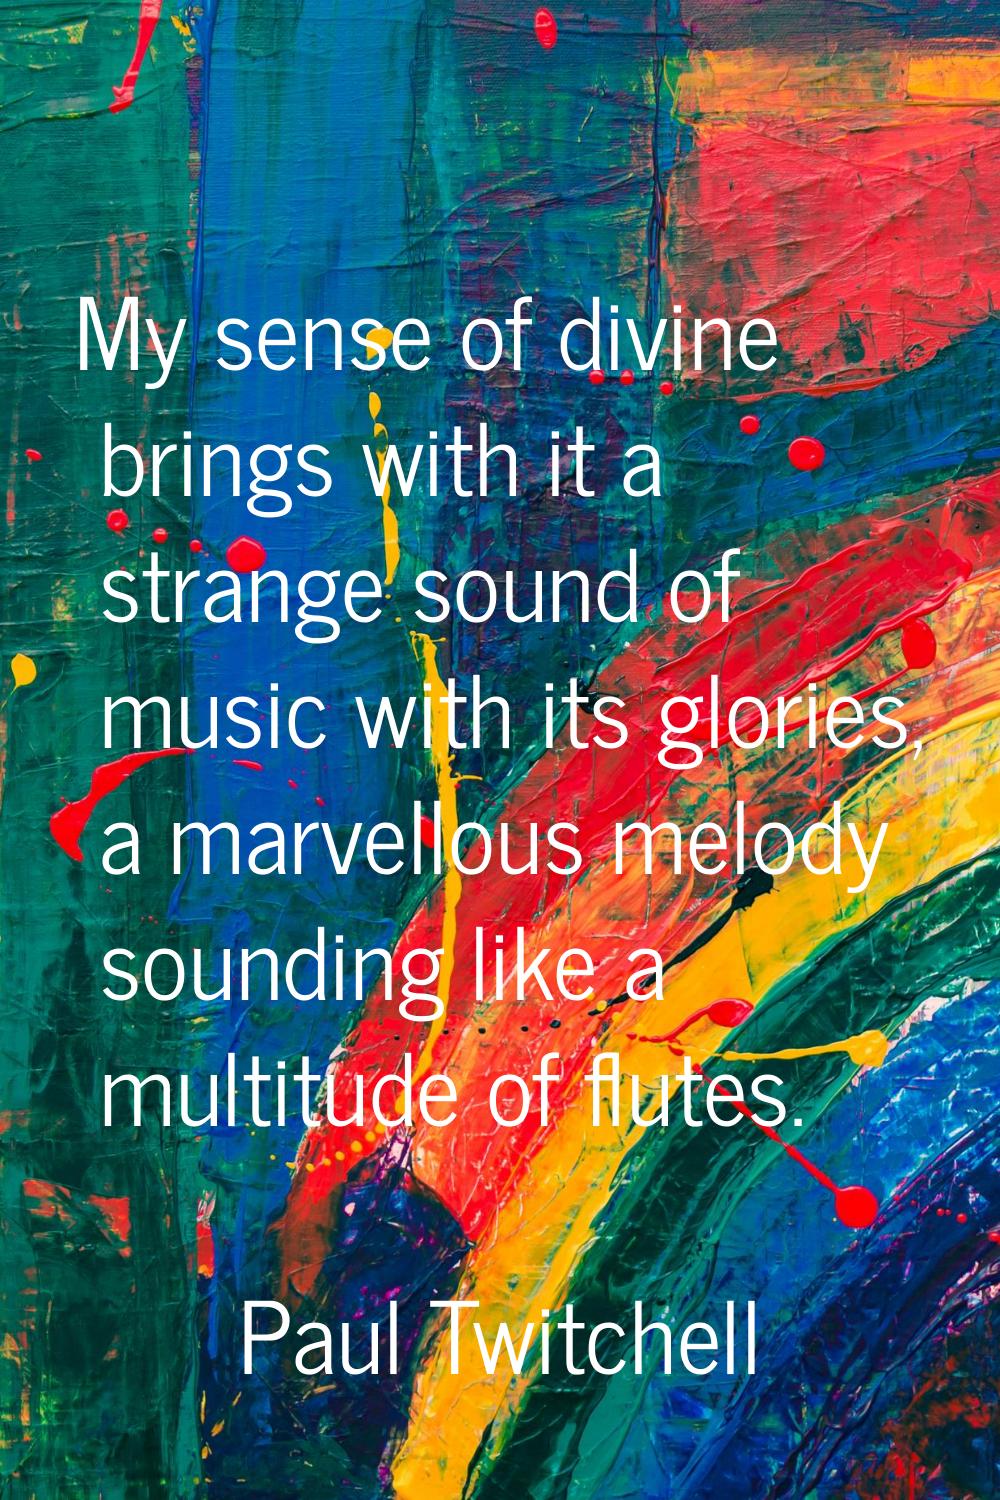 My sense of divine brings with it a strange sound of music with its glories, a marvellous melody so